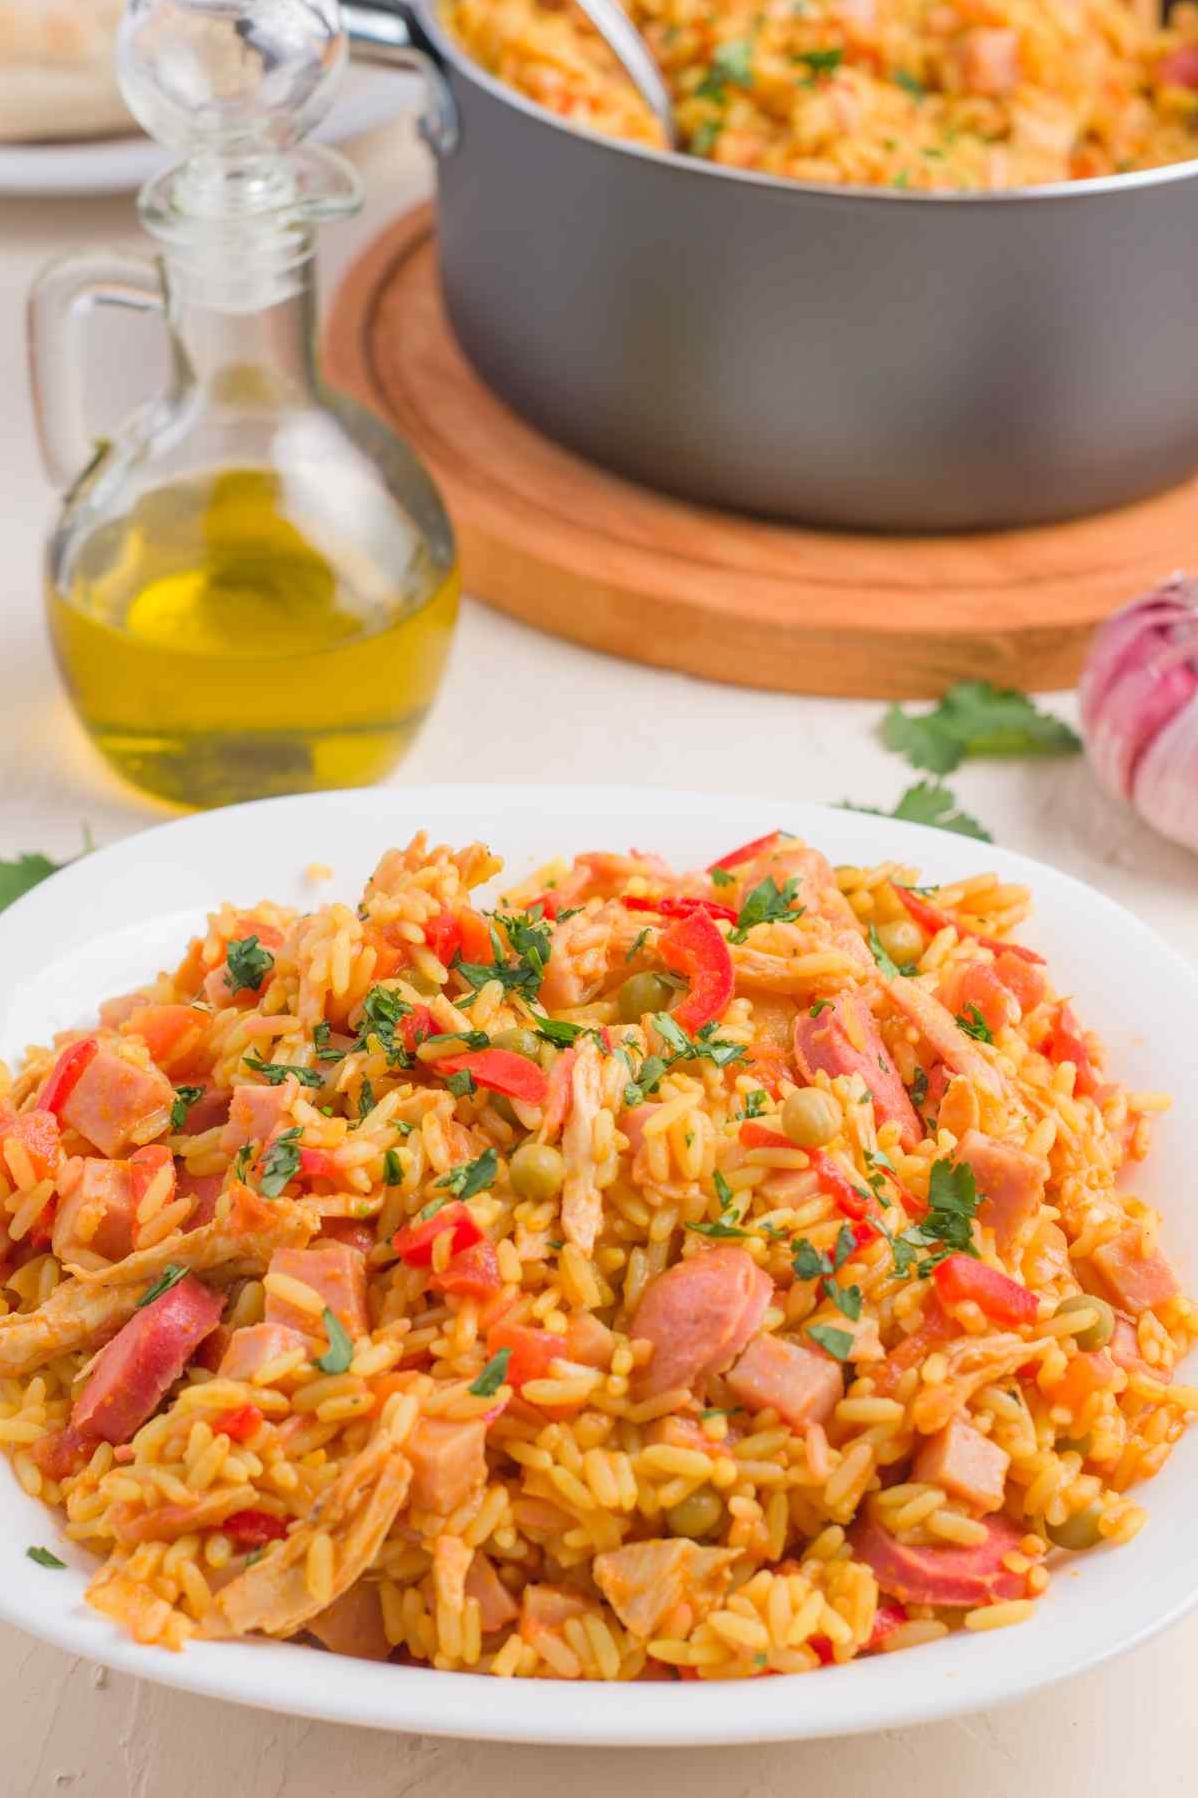  Aromatic saffron elevates the flavors of this classic Valencian rice dish.